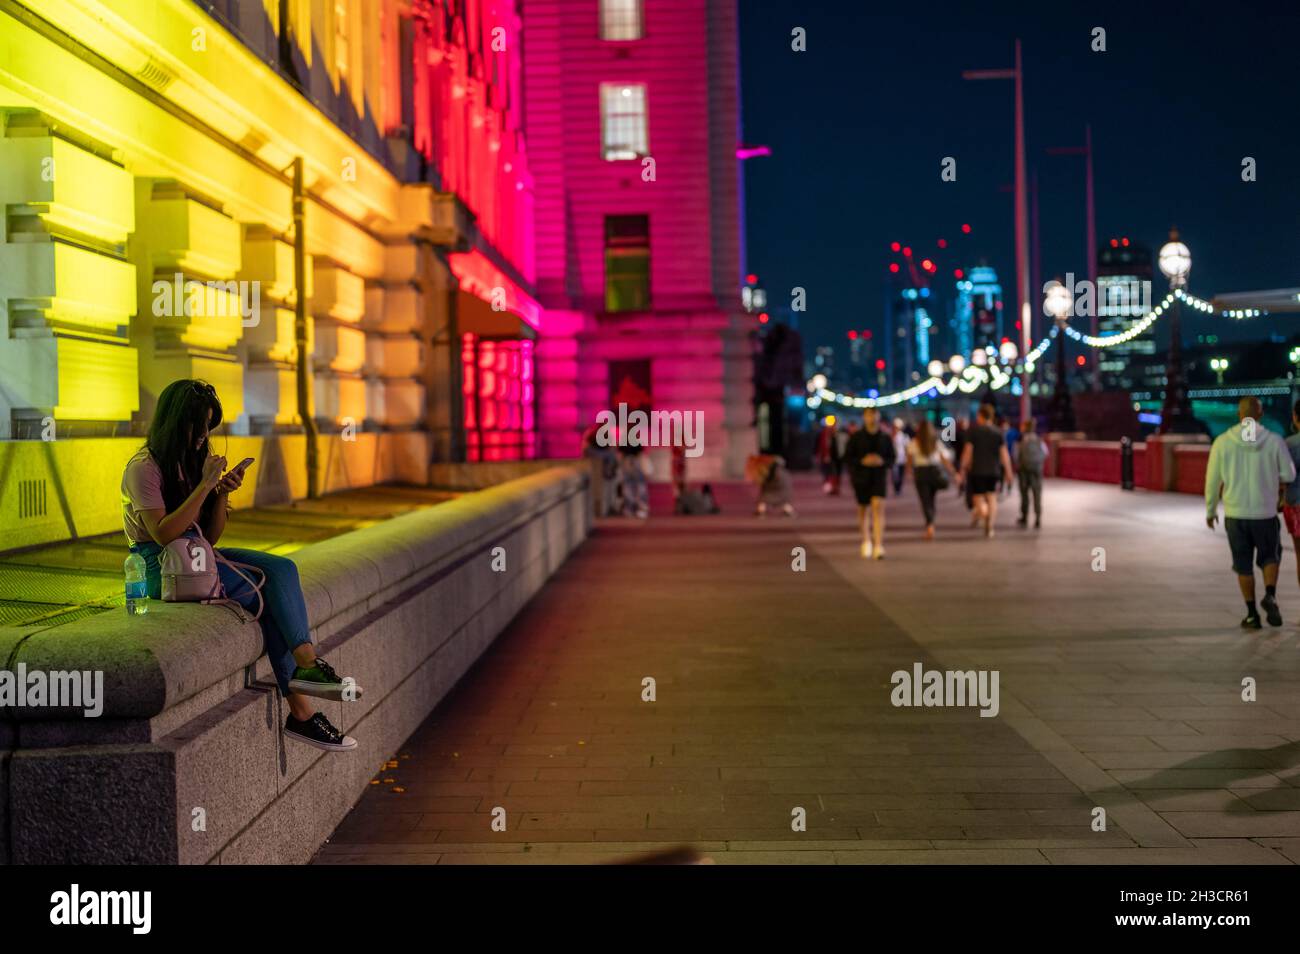 LONDON - SEPTEMBER 14, 2021: A young woman uses a smartphone while sat on a wall next to colorfully lit County Hall at night Stock Photo